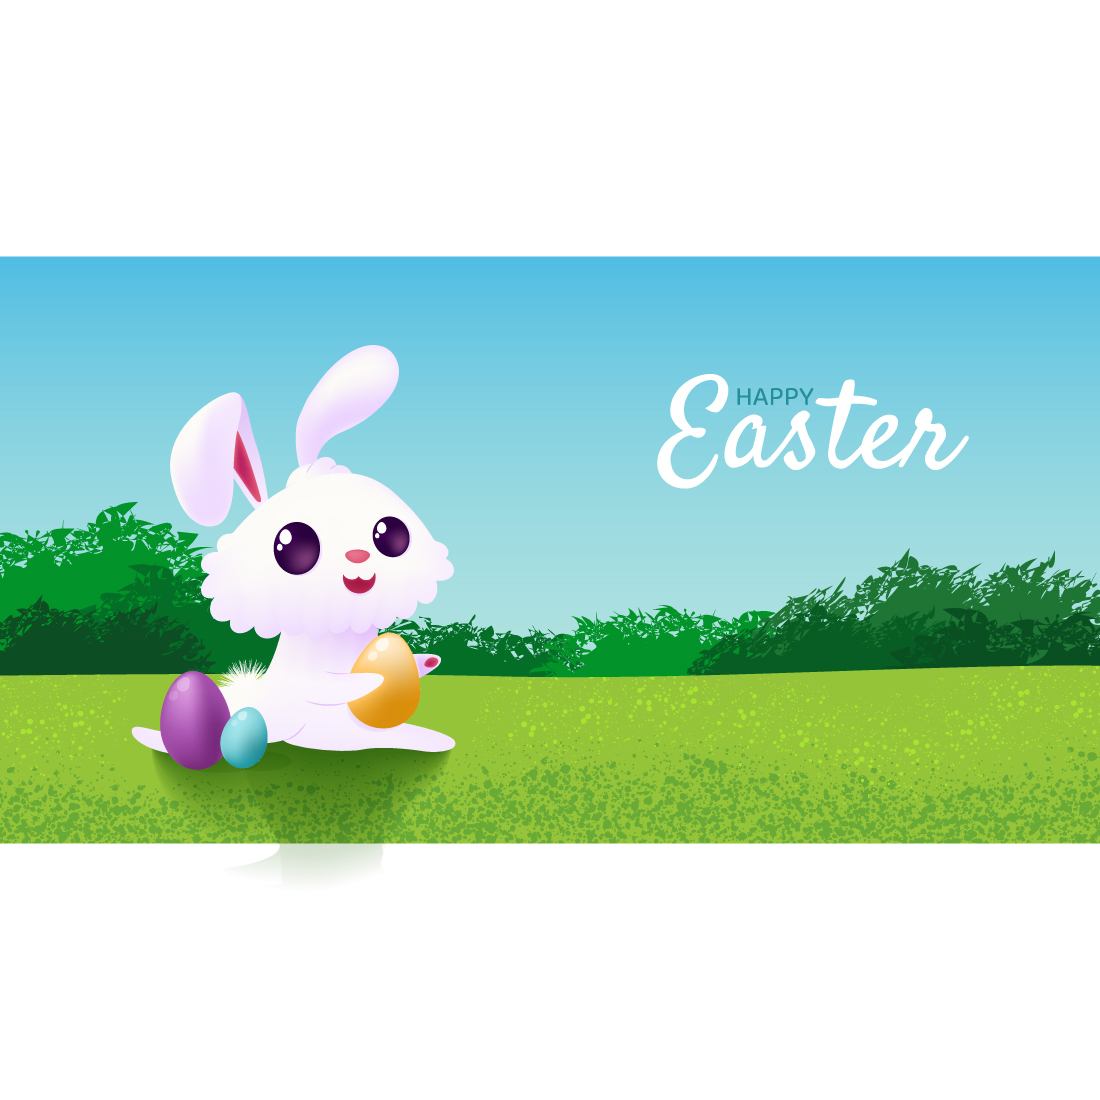 Set of Happy Easter banners with cute white bunny and eggs Vector illustration with cartoon rabbit on green field preview image.